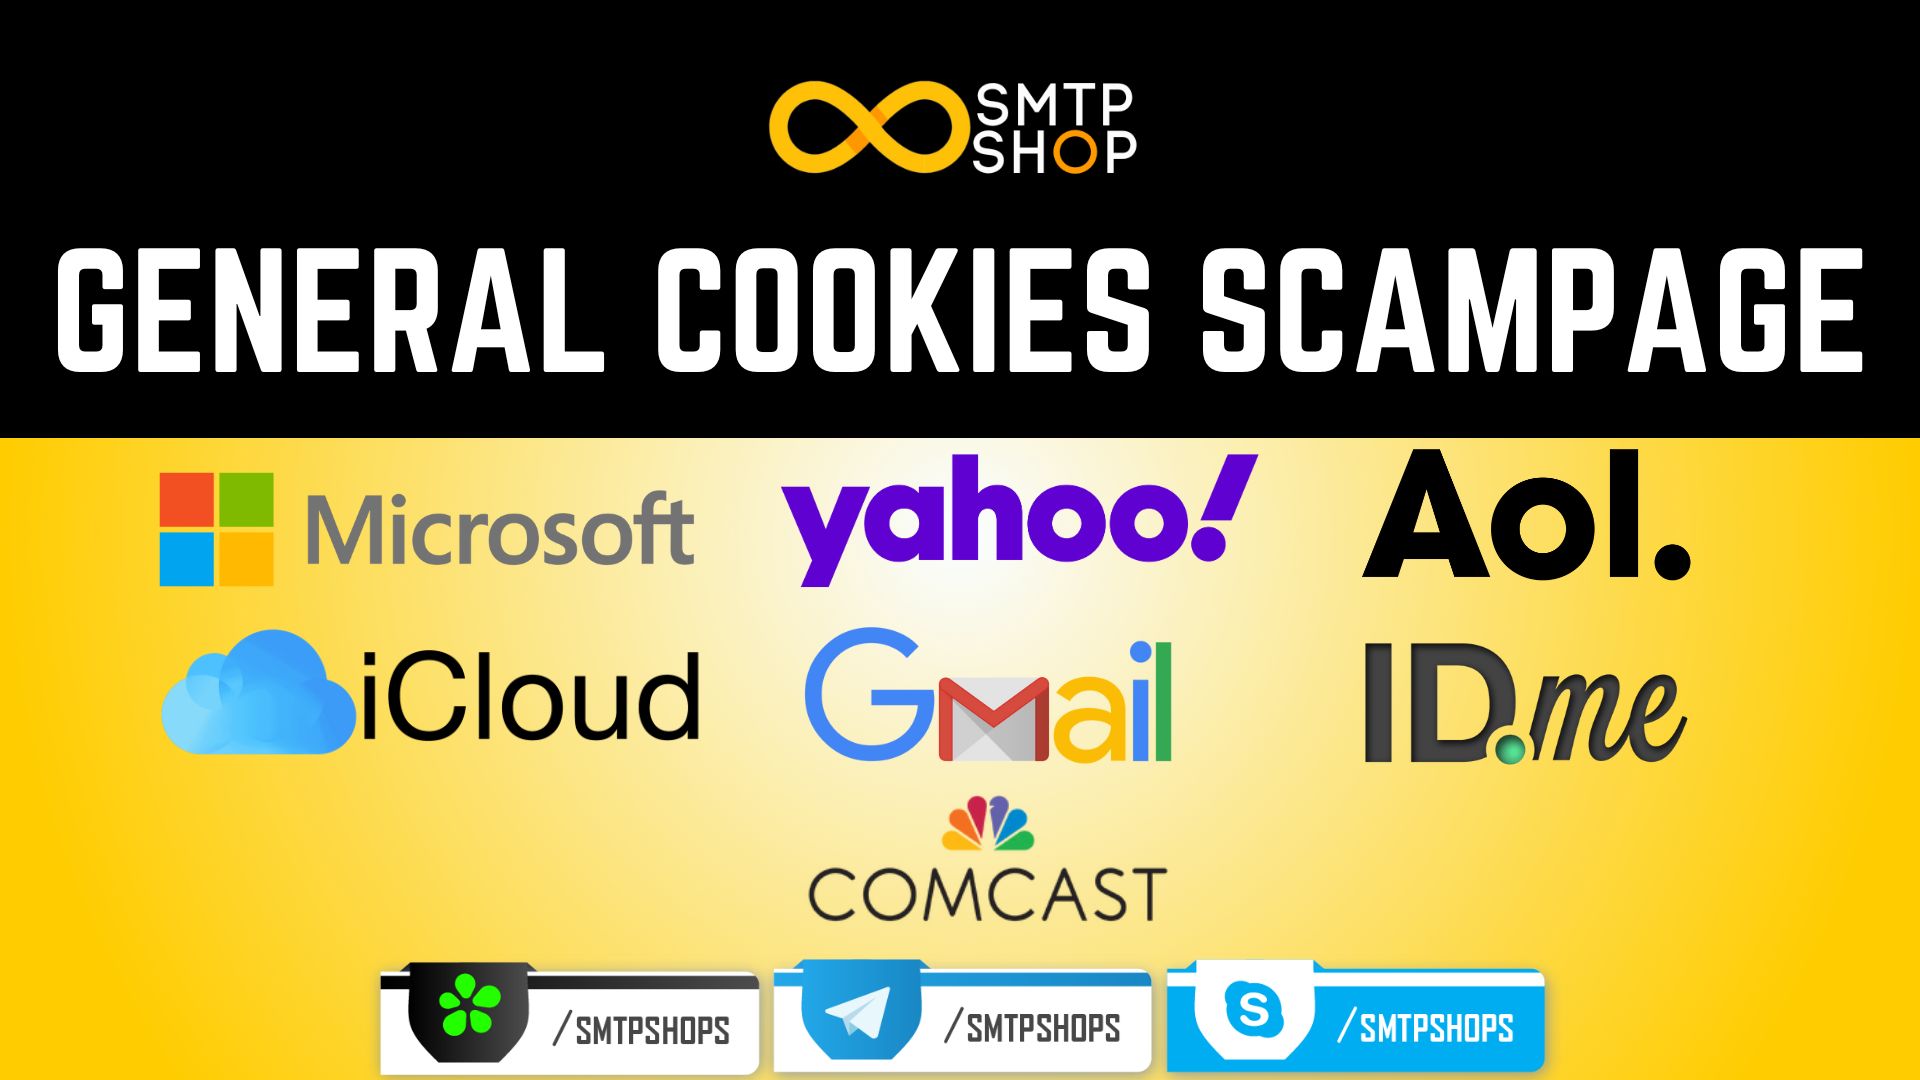 General Cookies Scampage (Gmail, Yahoo, Office365, AOL, COMCAST, Icloud, ID.ME)